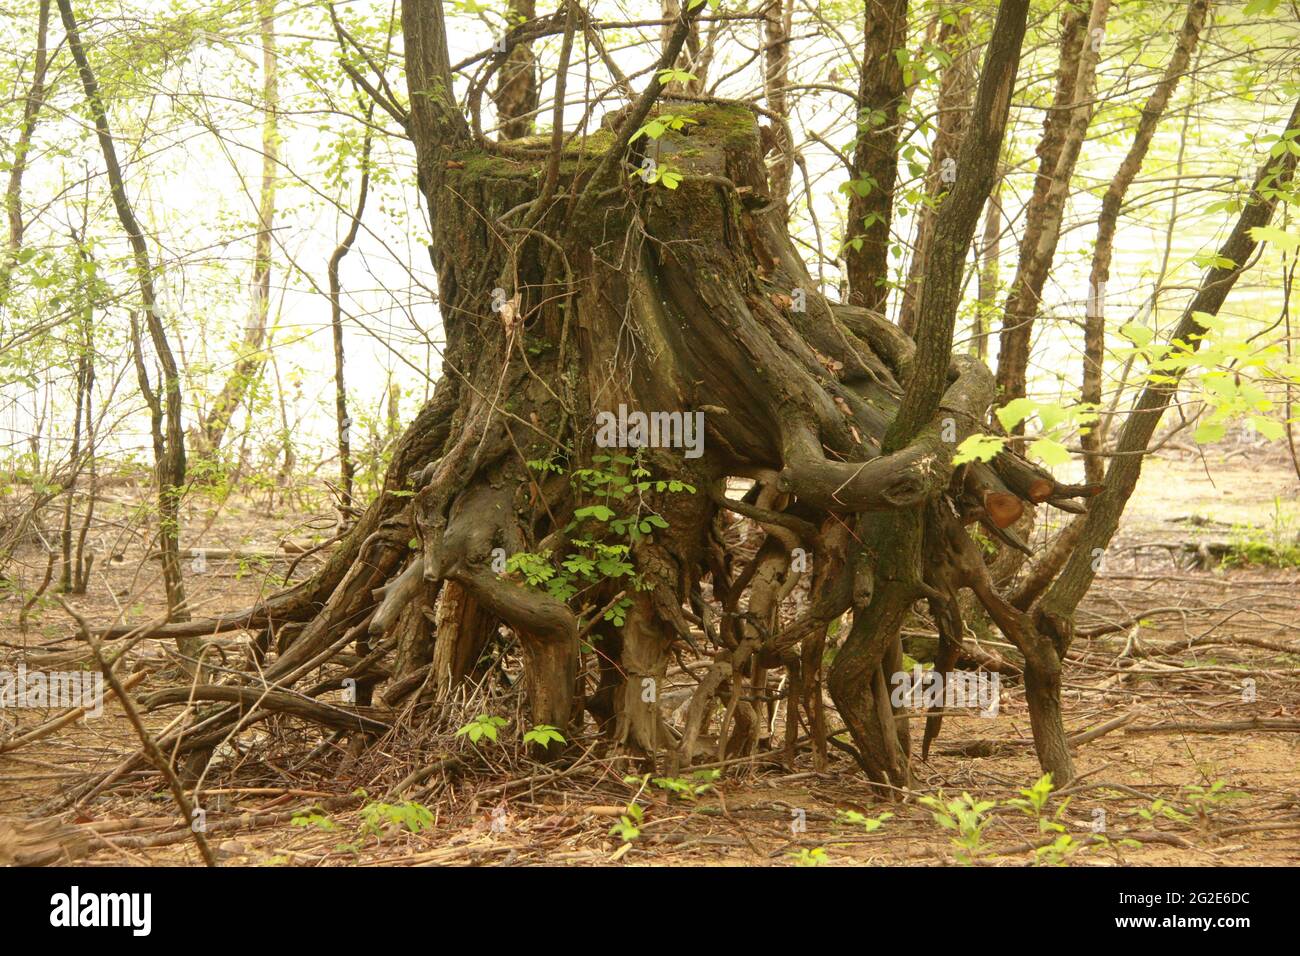 Large tree with exposed roots on the shore of a river in West Virginia, USA. Cut tree with multiple shoots growing up. Stock Photo